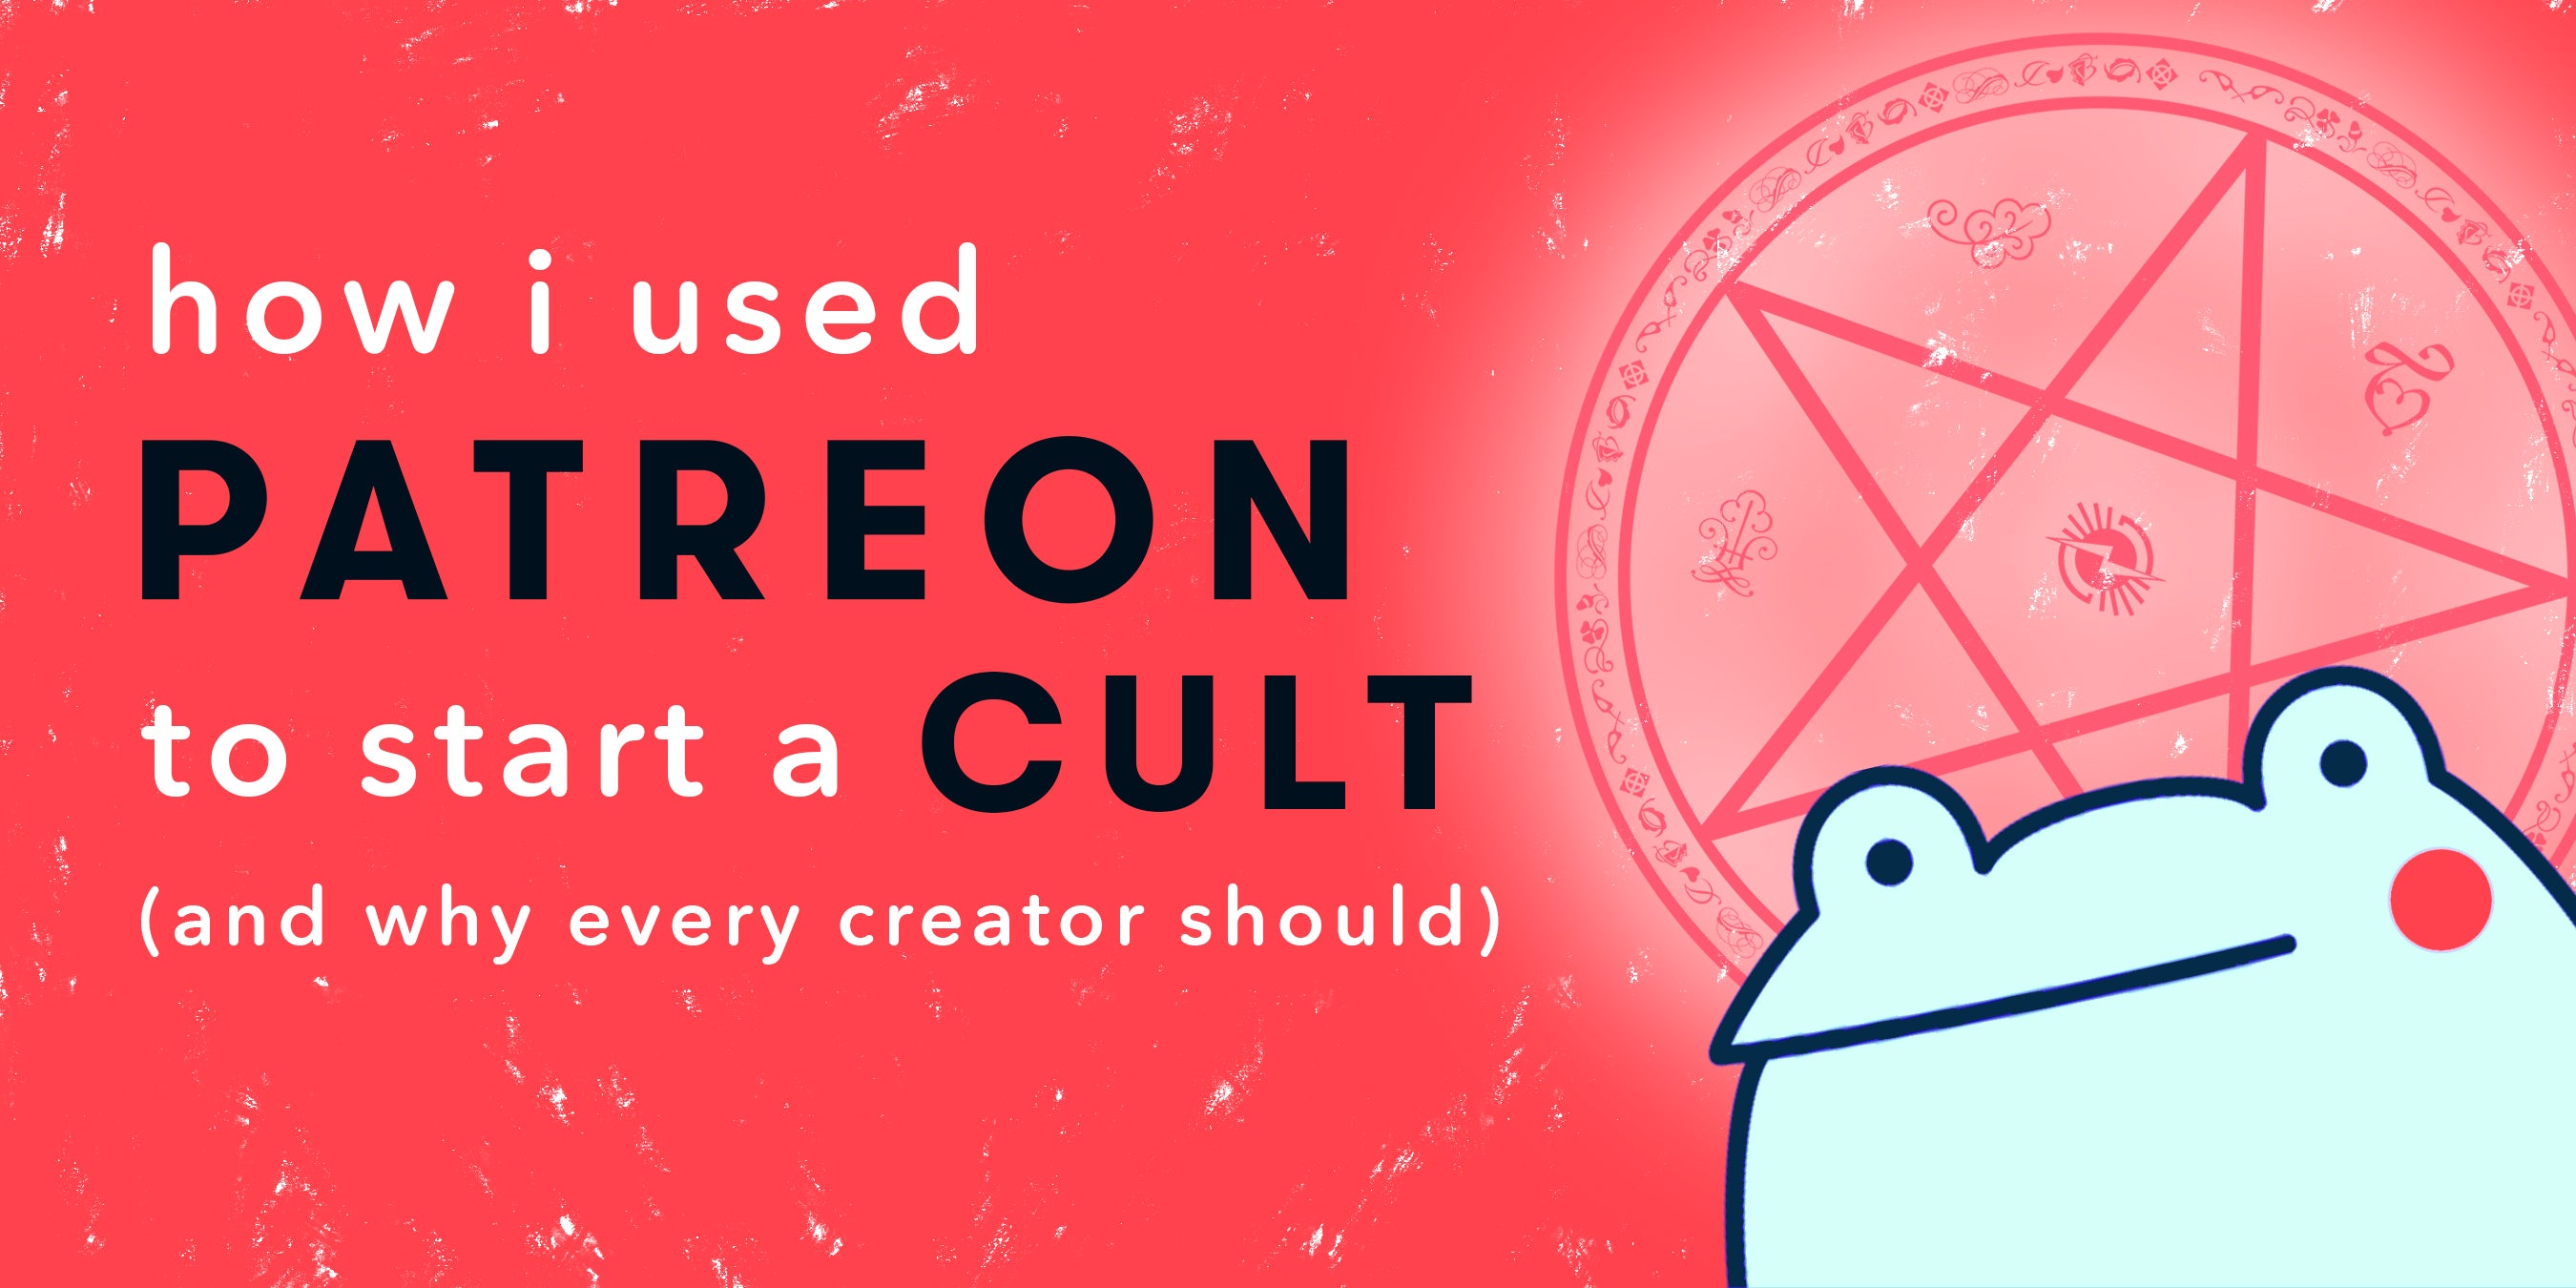 How I used Patreon to Start a Cult (and why every creator should)